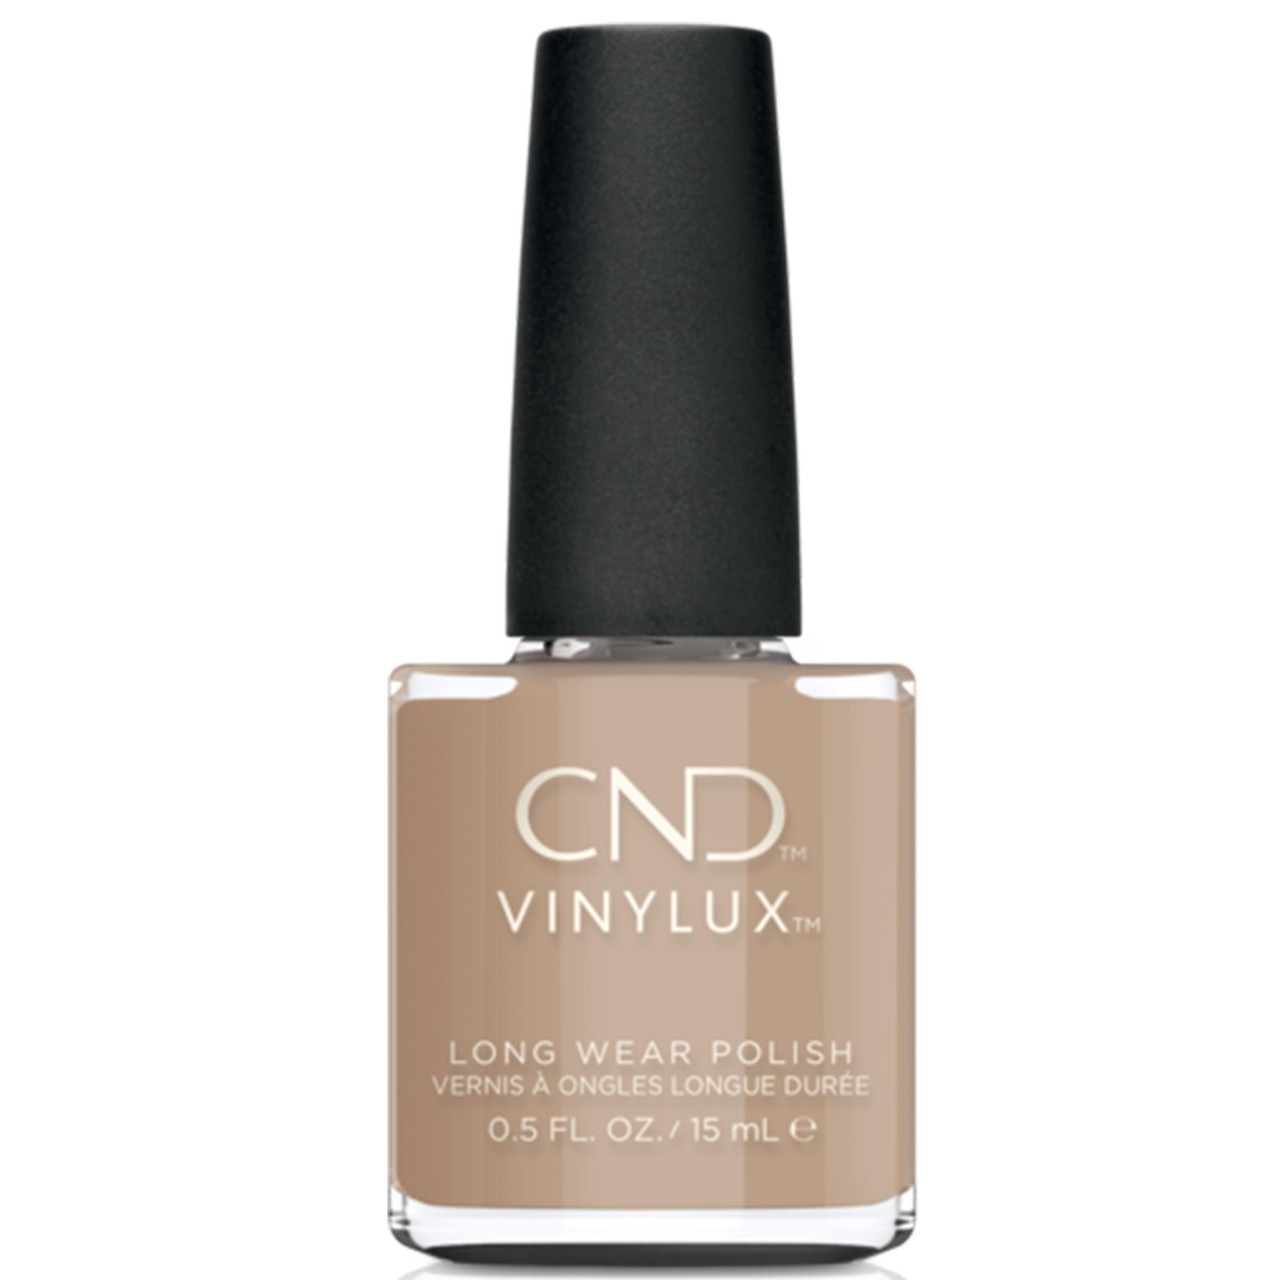 CND Vinylux Nail Polish Wrapped in Linen # 384 - 15 mL / 0.5 fl. oz